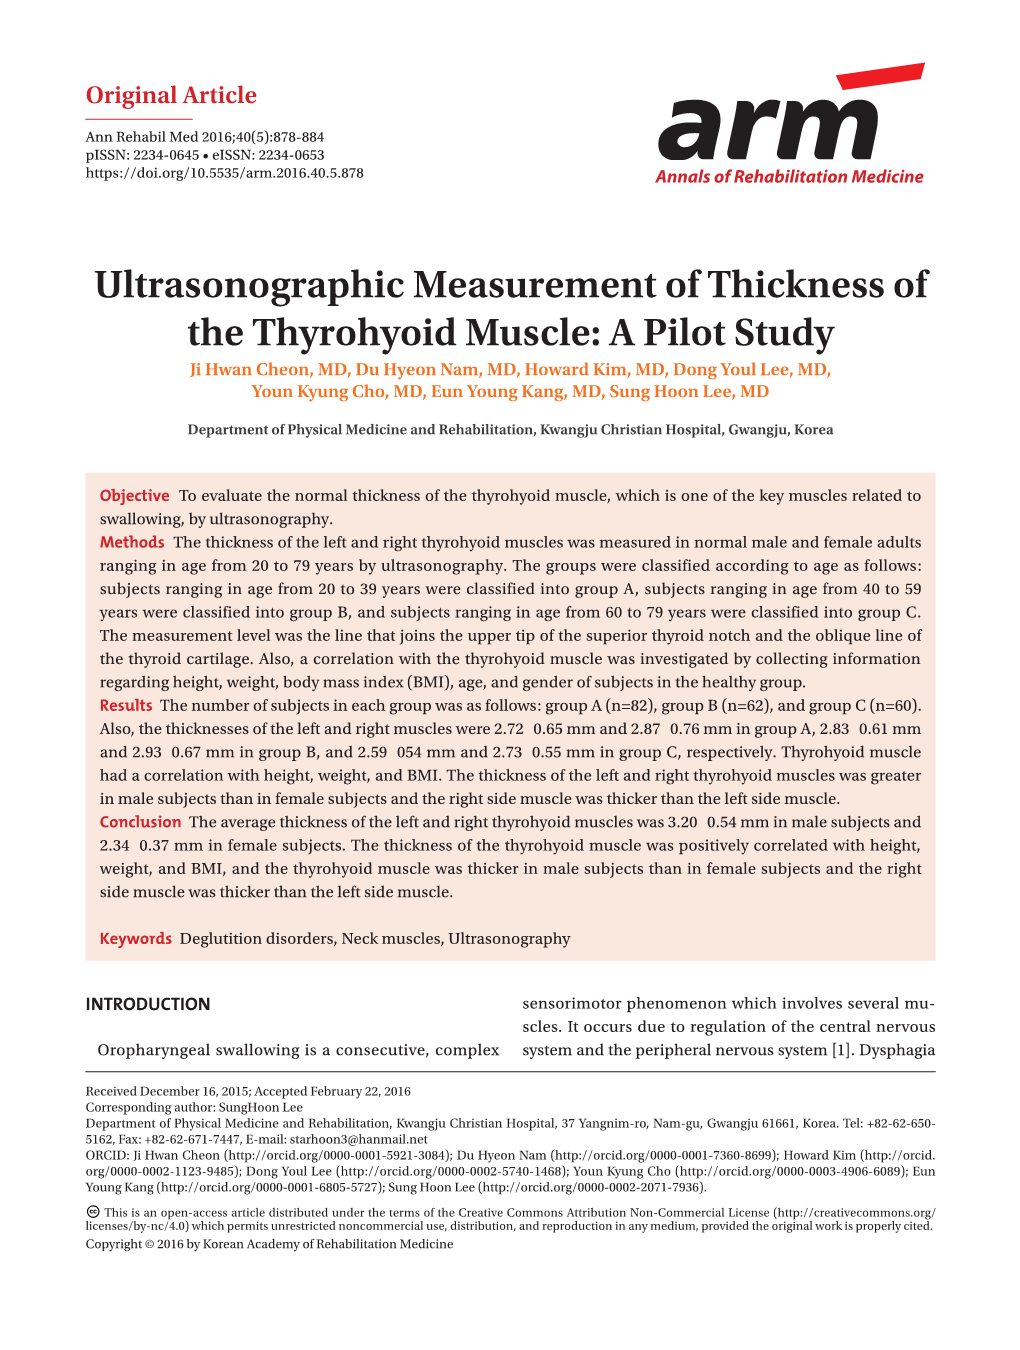 Ultrasonographic Measurement of Thickness of the Thyrohyoid Muscle